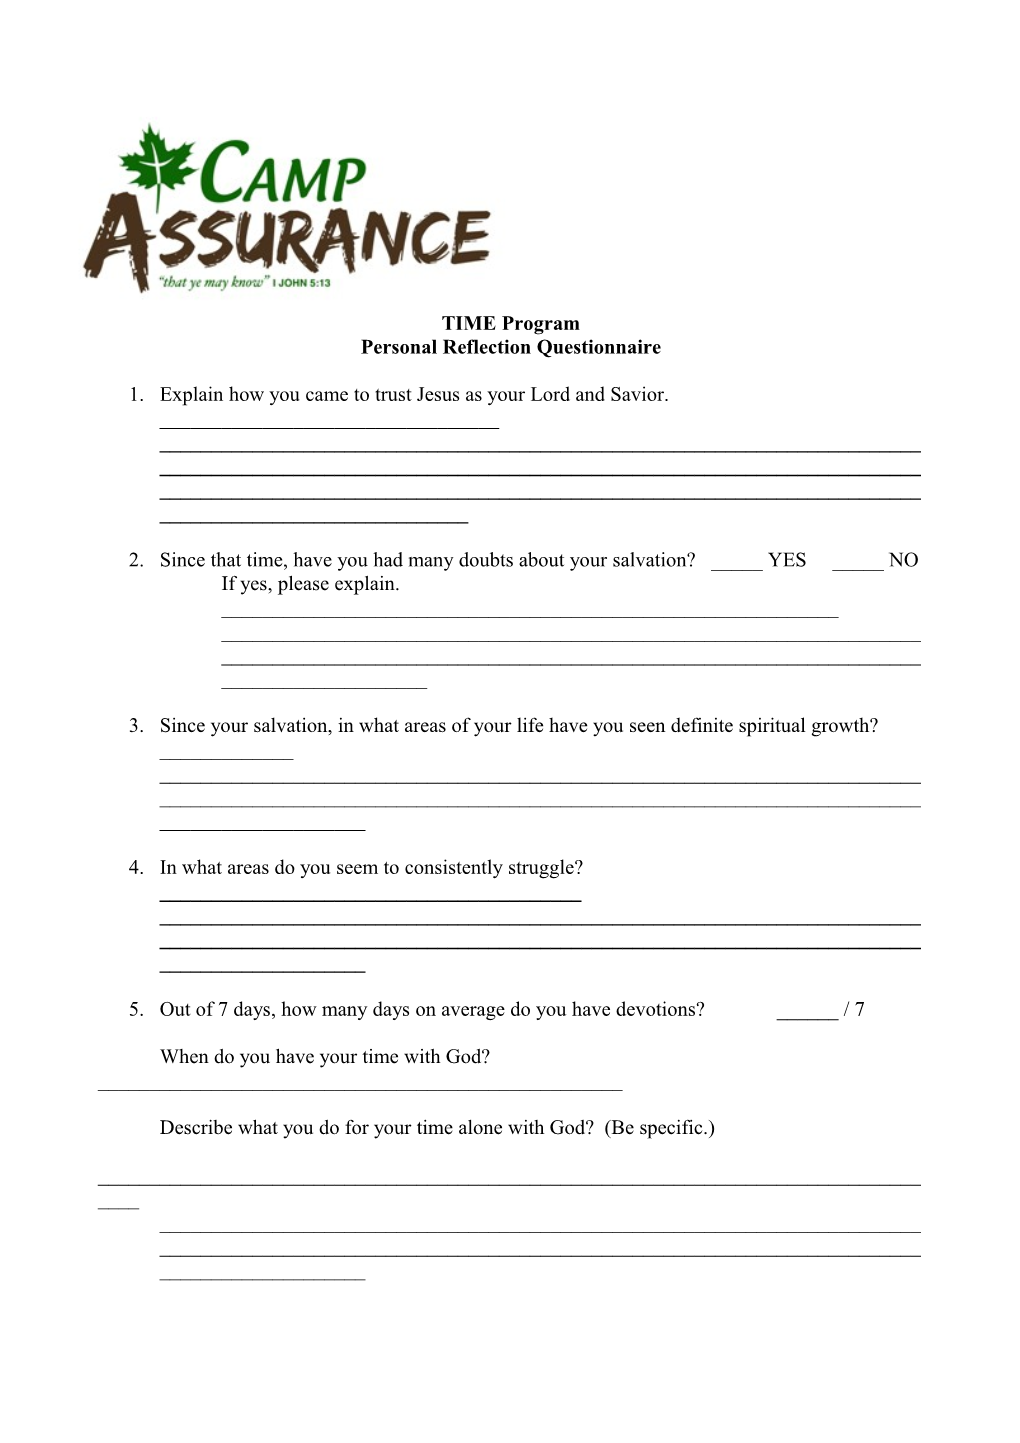 Personal Reflection Questionnaire